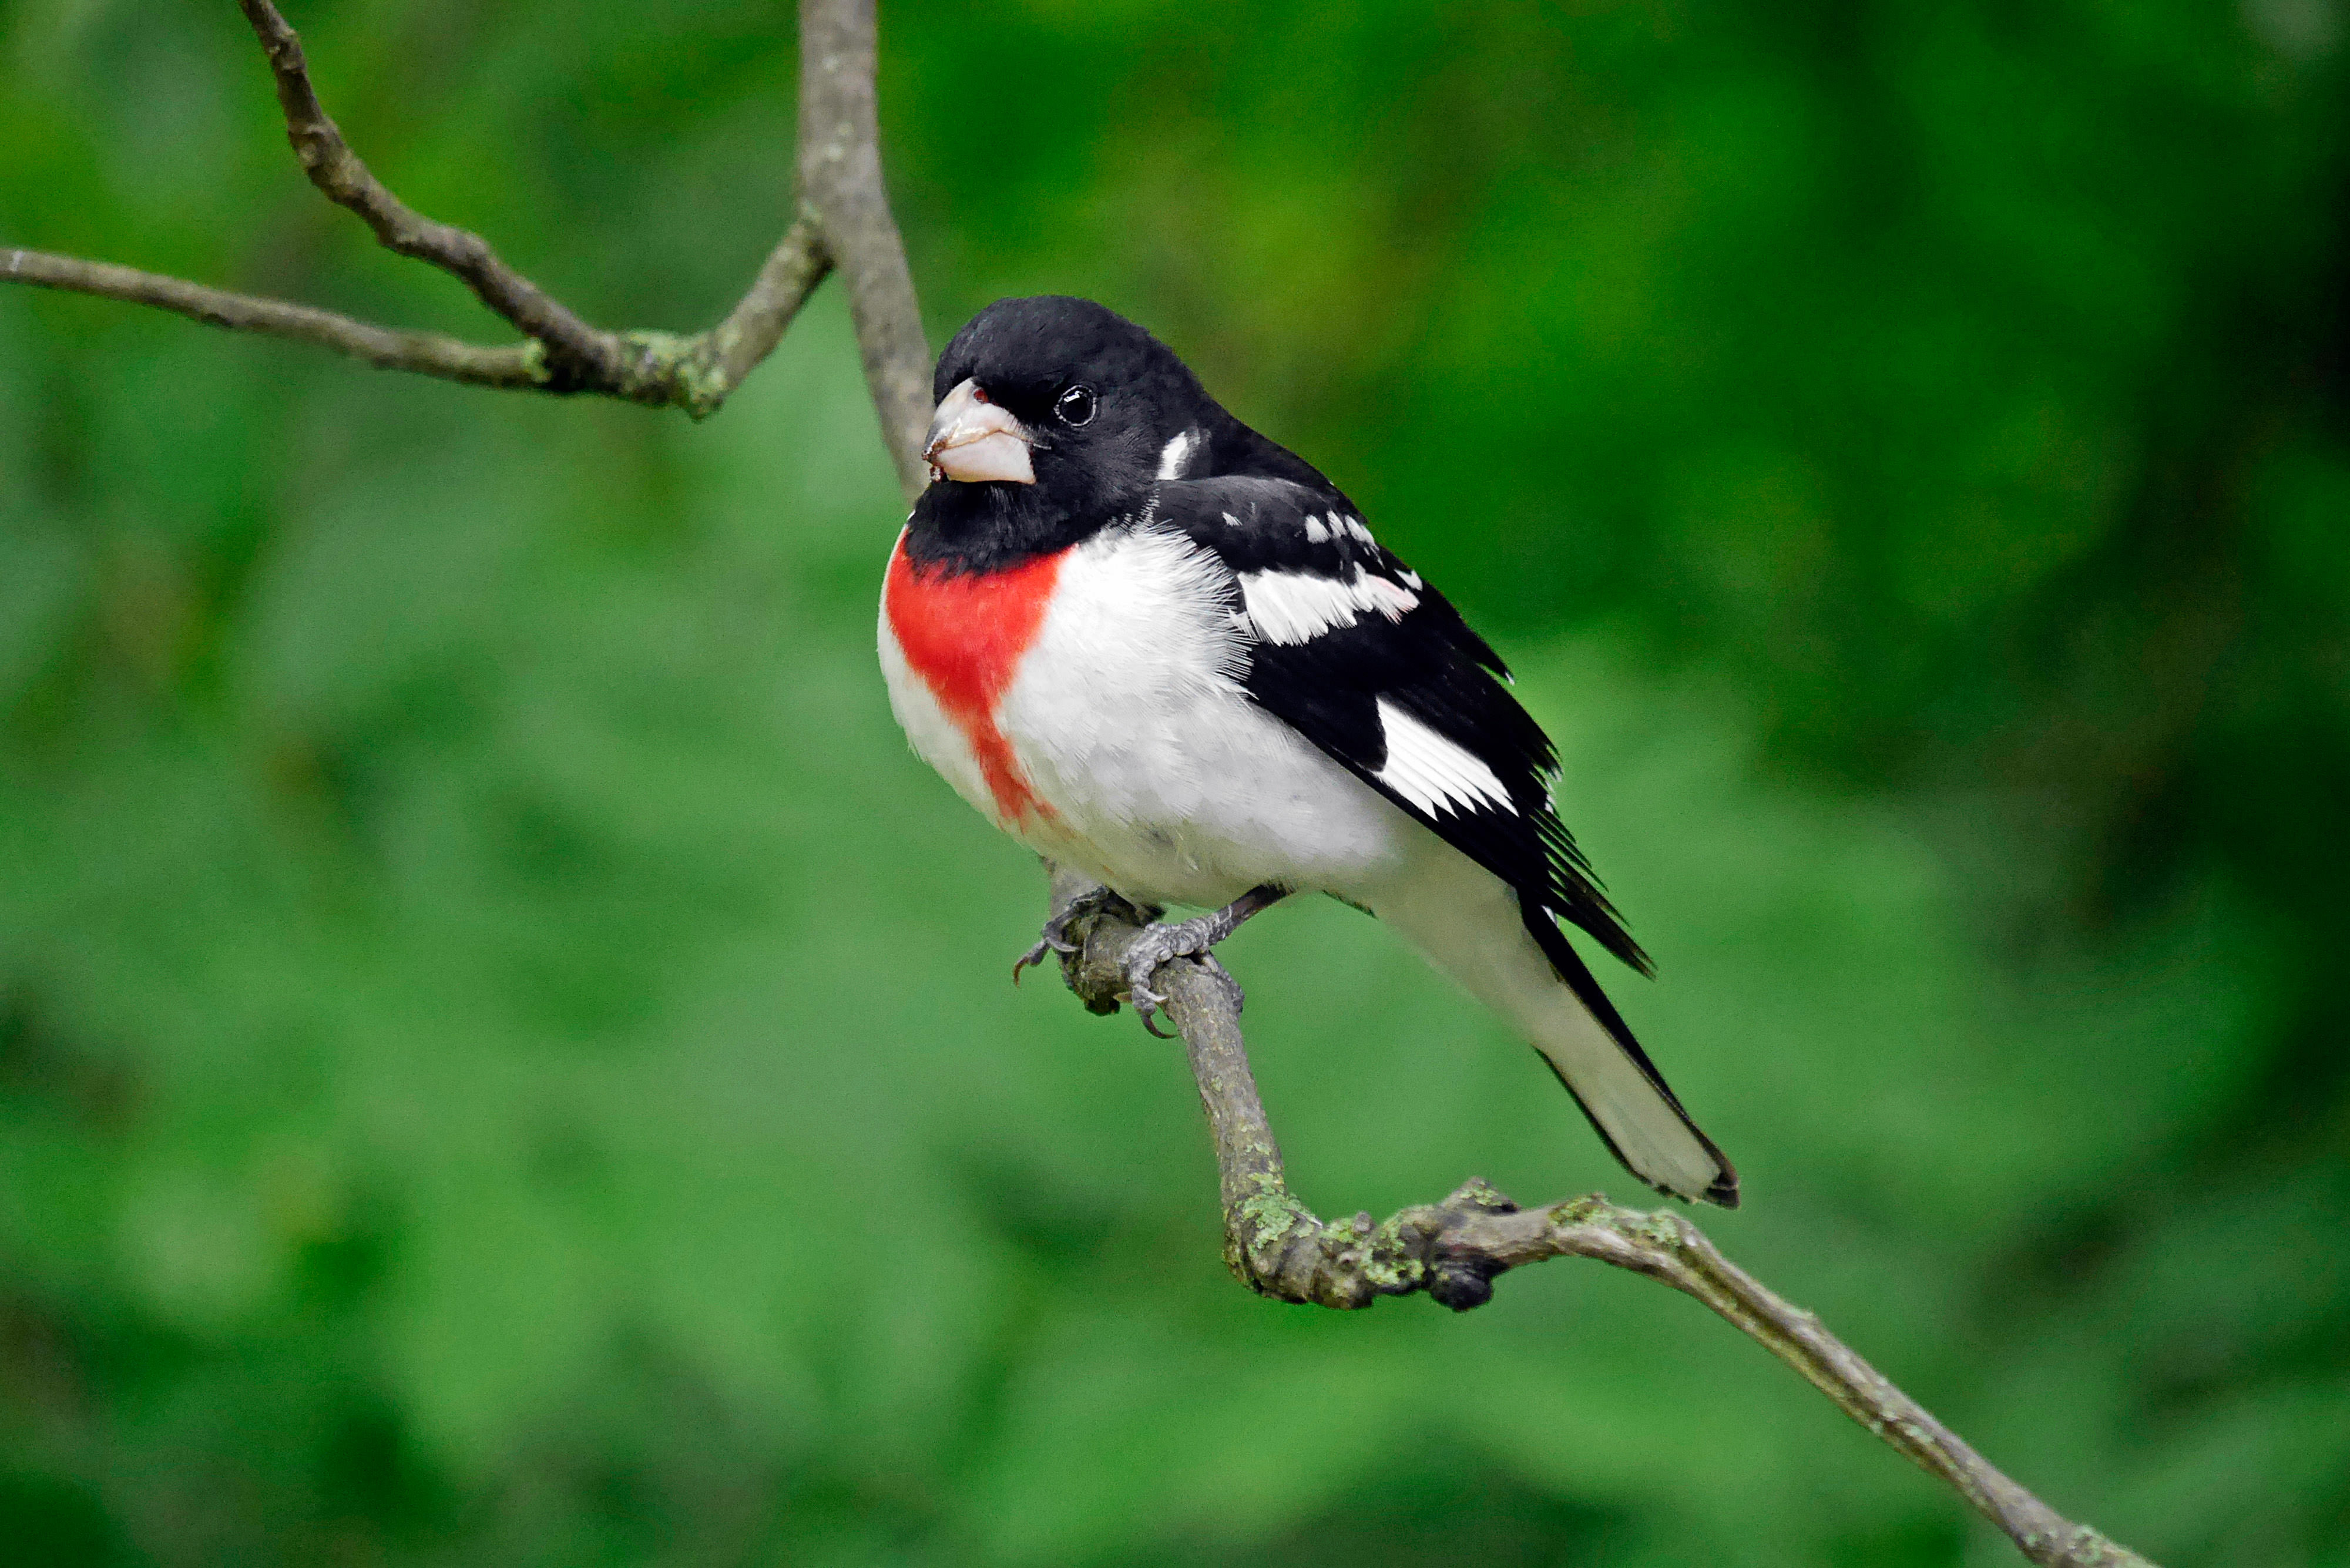 A rose-breasted grosbeak perches on a branch.